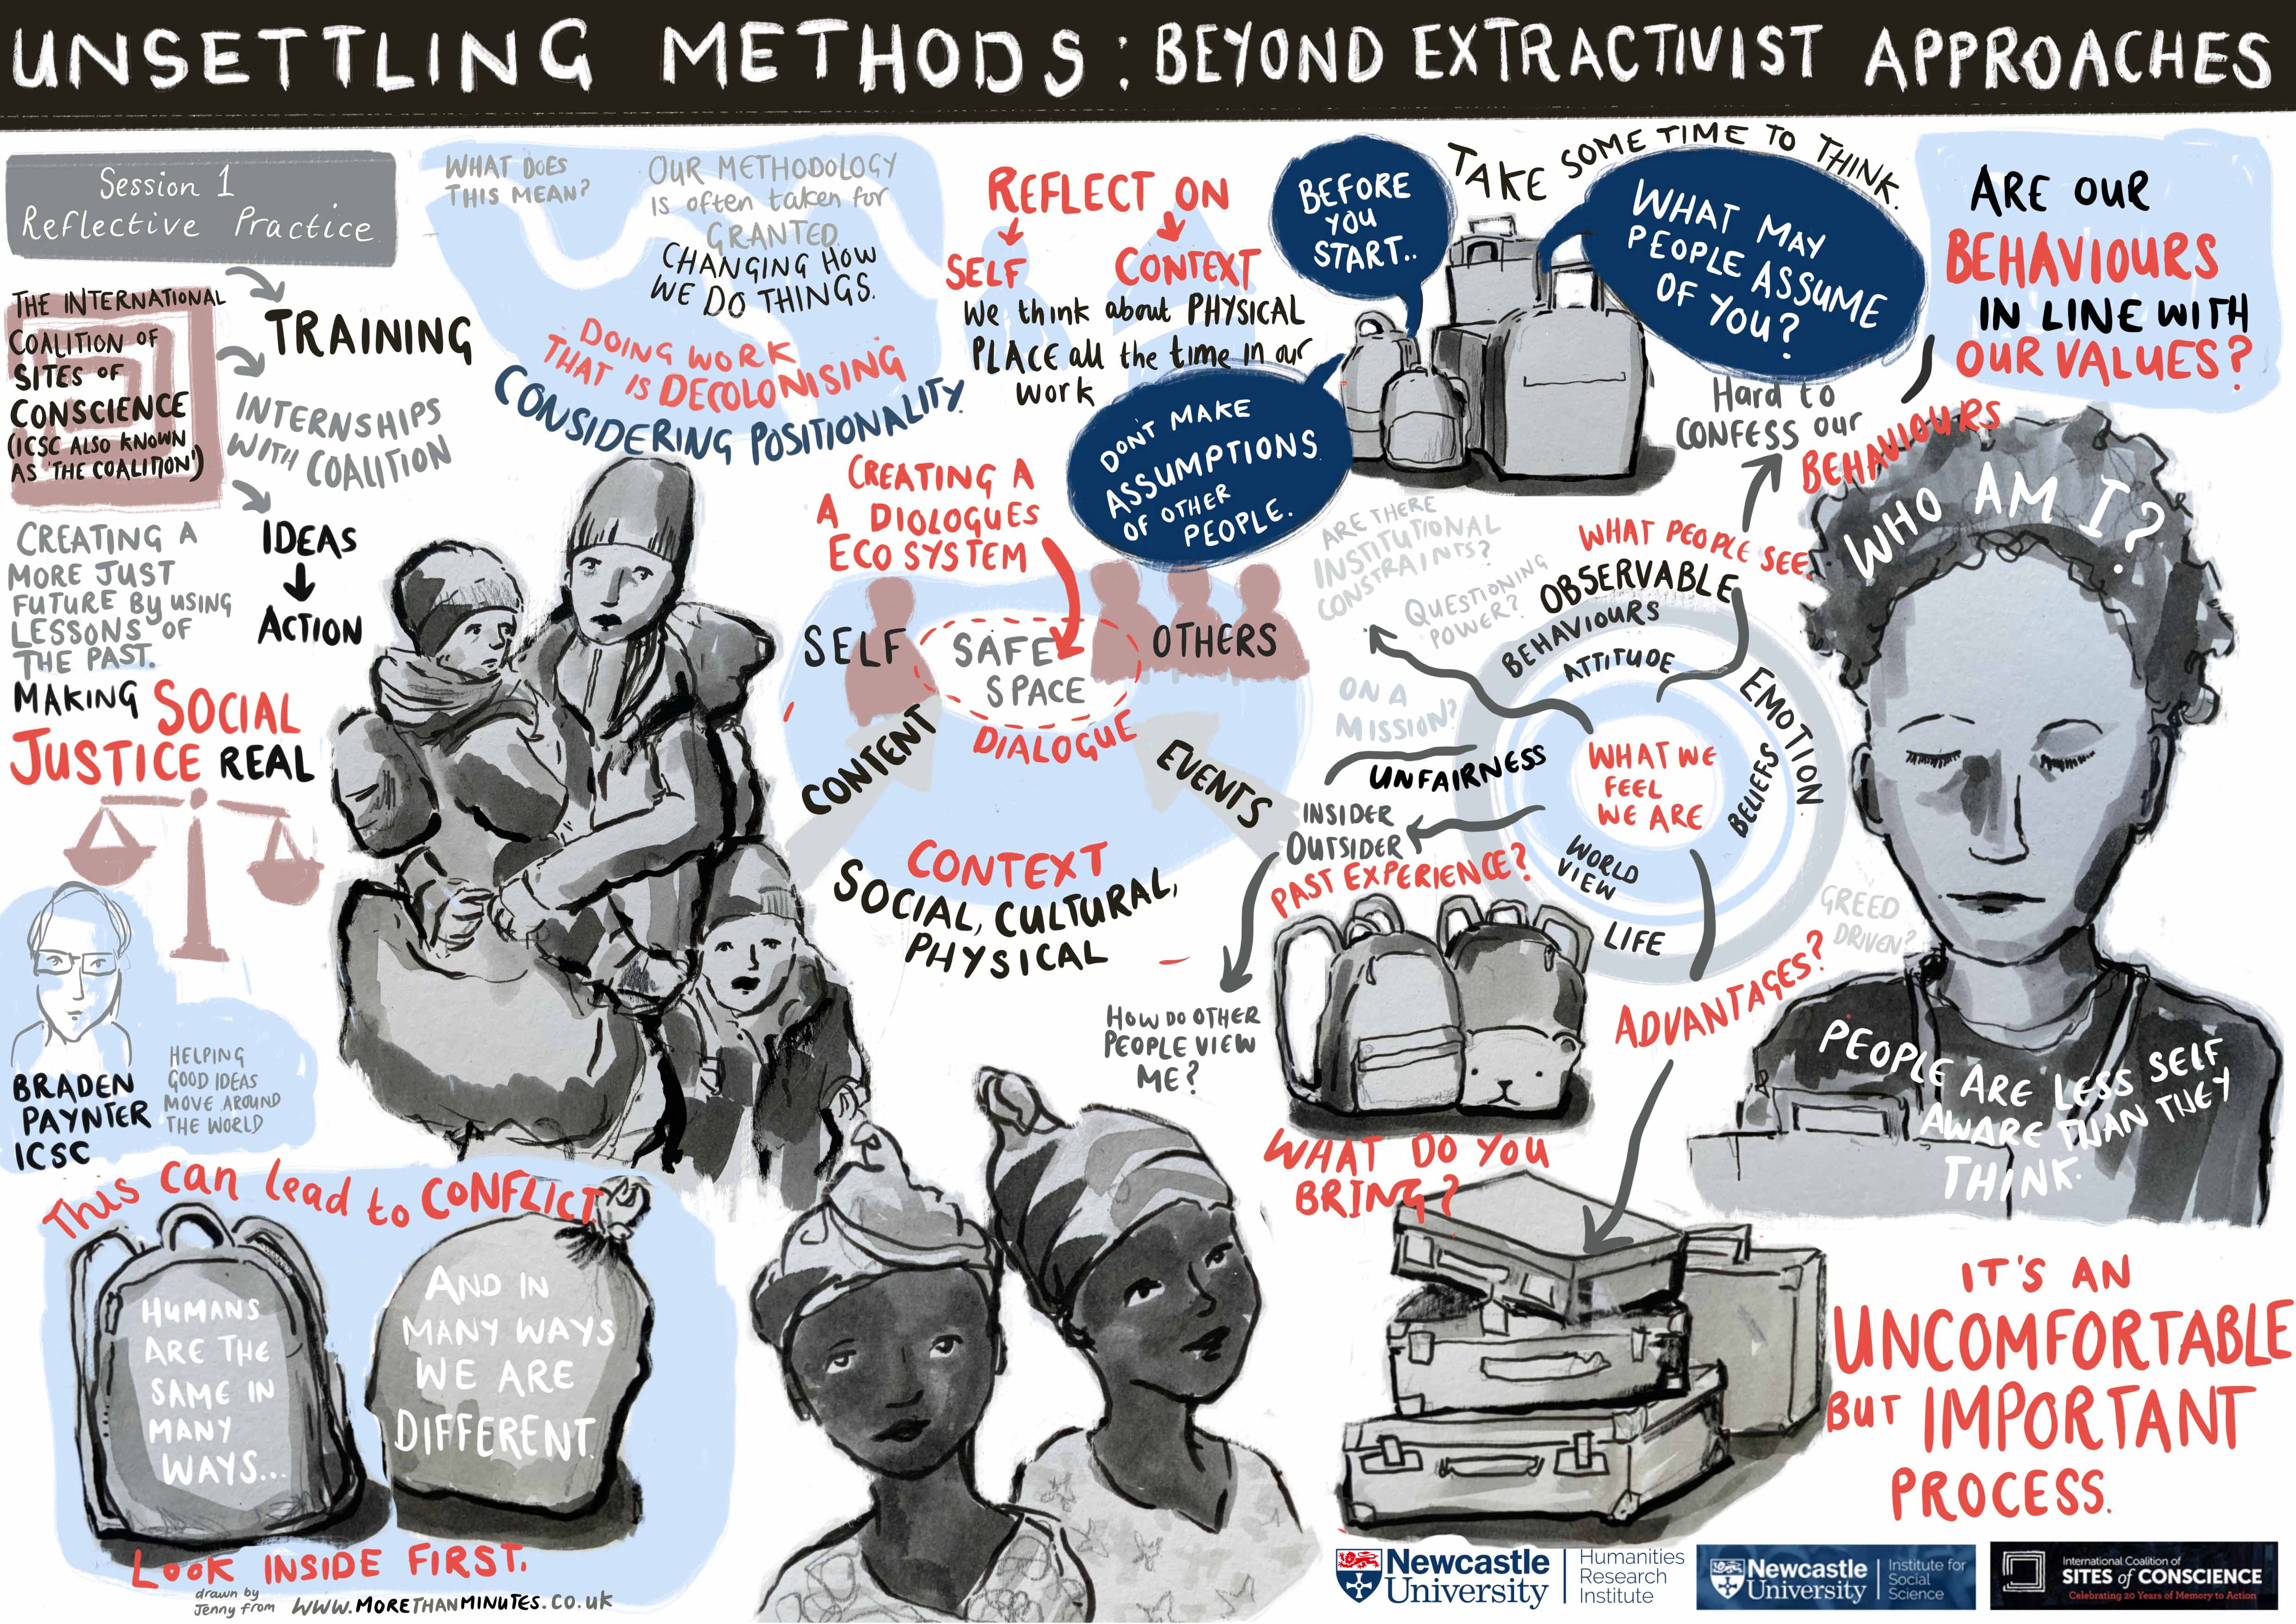 Visual minutes from the Unsettling Methods workshop